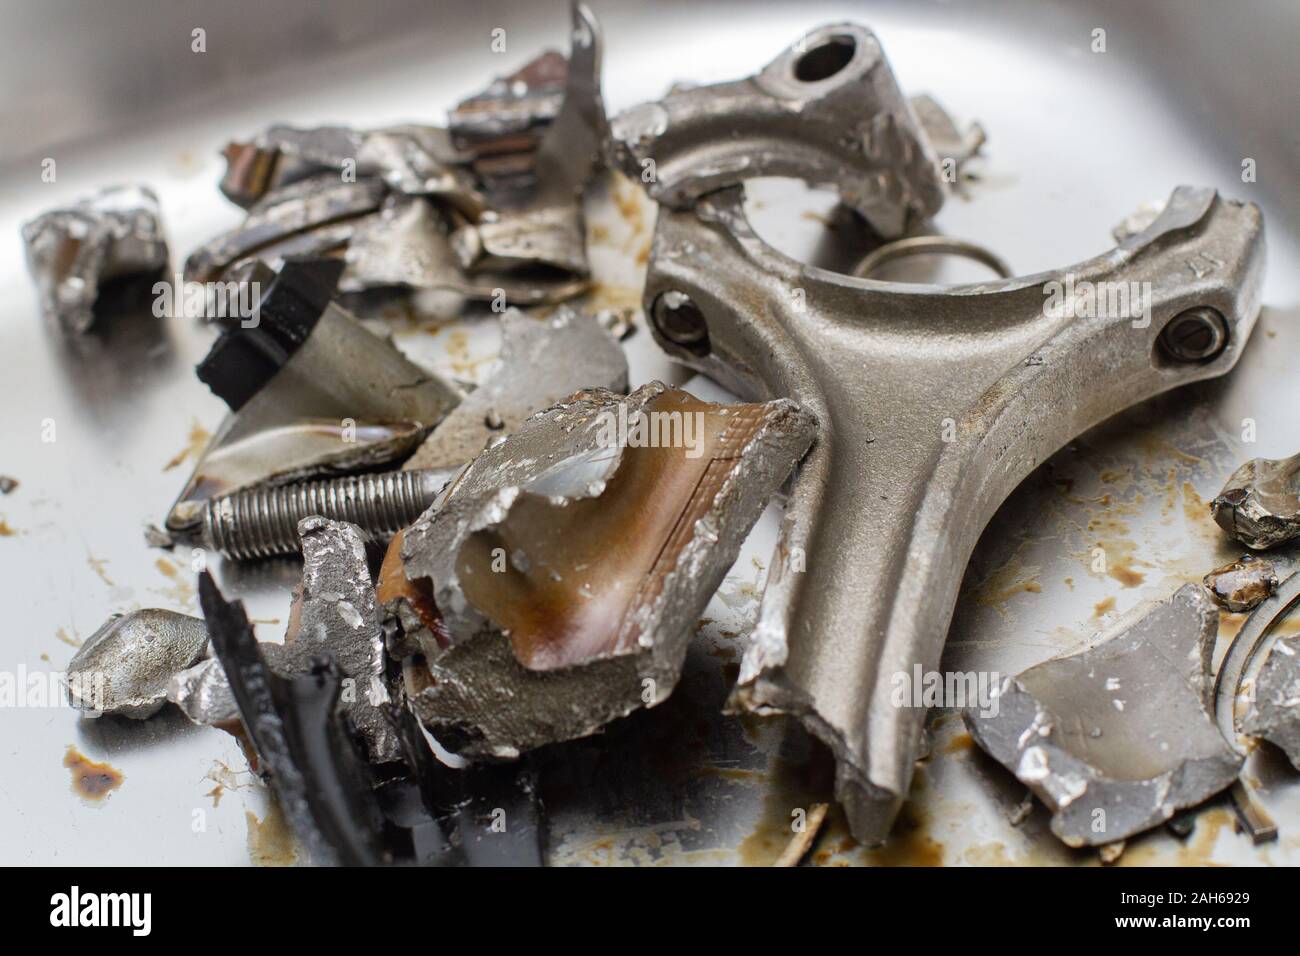 the engine of the sports car exploded and collapsed at the start of the race Stock Photo